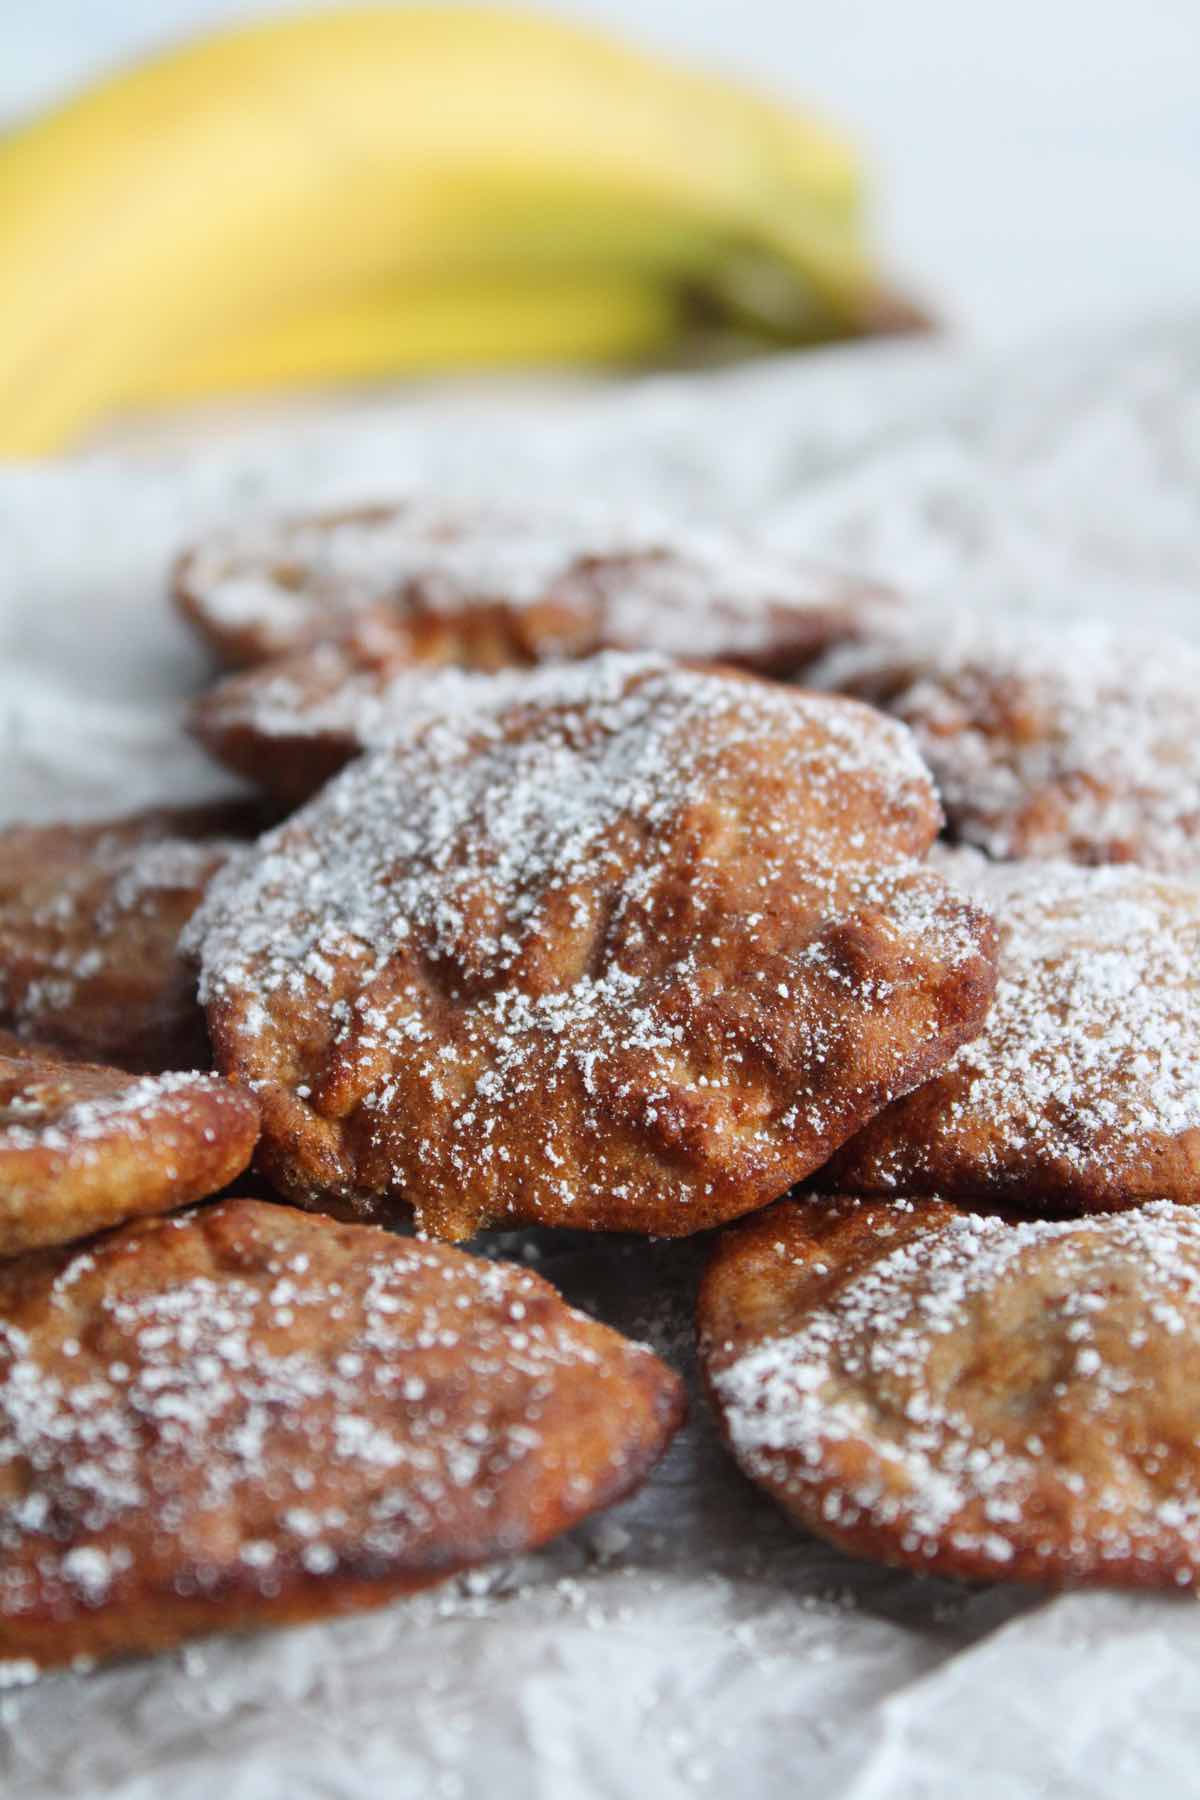 This easy recipe for air fryer banana fritters is made with ripe mashed bananas and everyday ingredients.